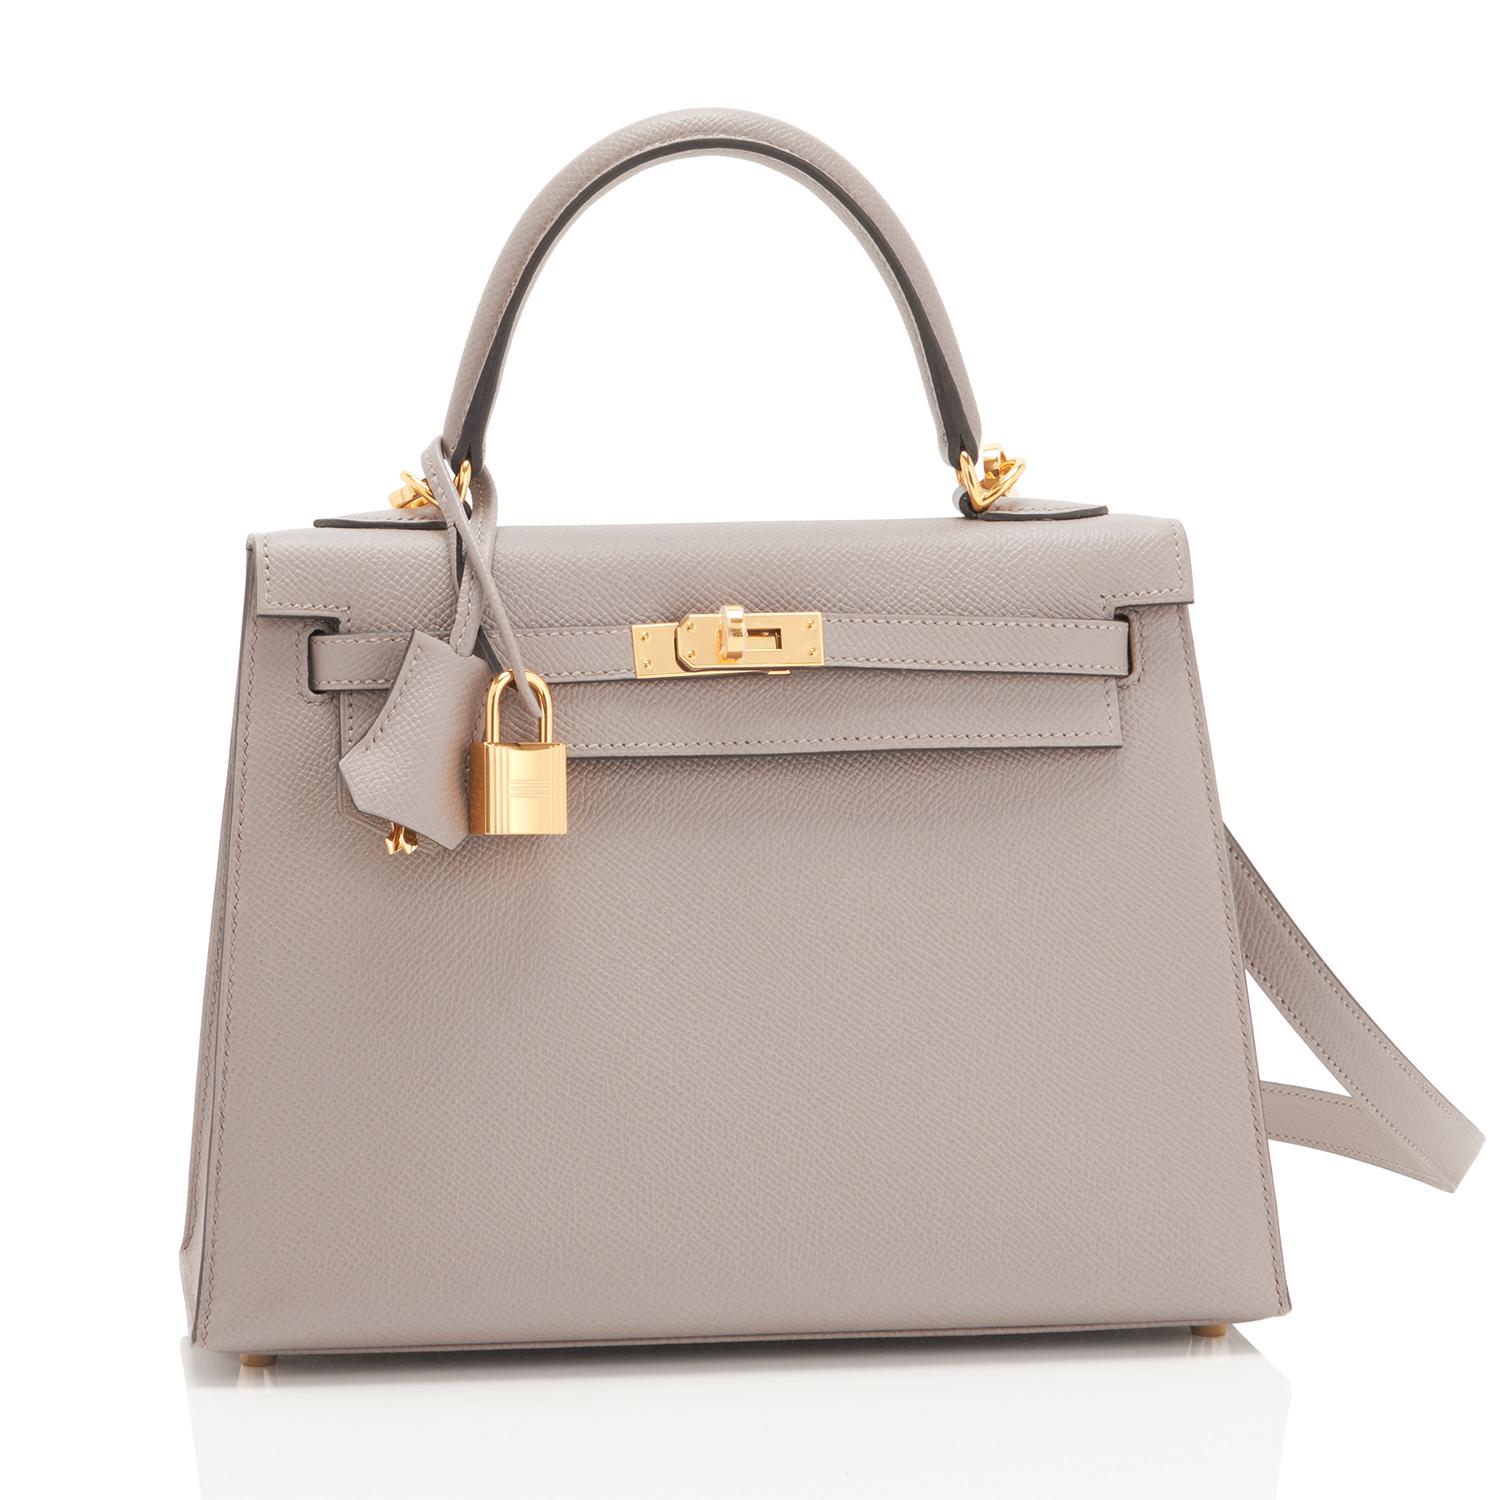 Hermes Kelly 25cm Gris Asphalte Epsom Sellier Gold Hardware C Stamp Fashionista
Brand New in Box. Store Fresh. Pristine Condition (with plastic on hardware).
Just purchased from Hermes store; bag bears new 2018 interior C Stamp
Perfect gift! Comes